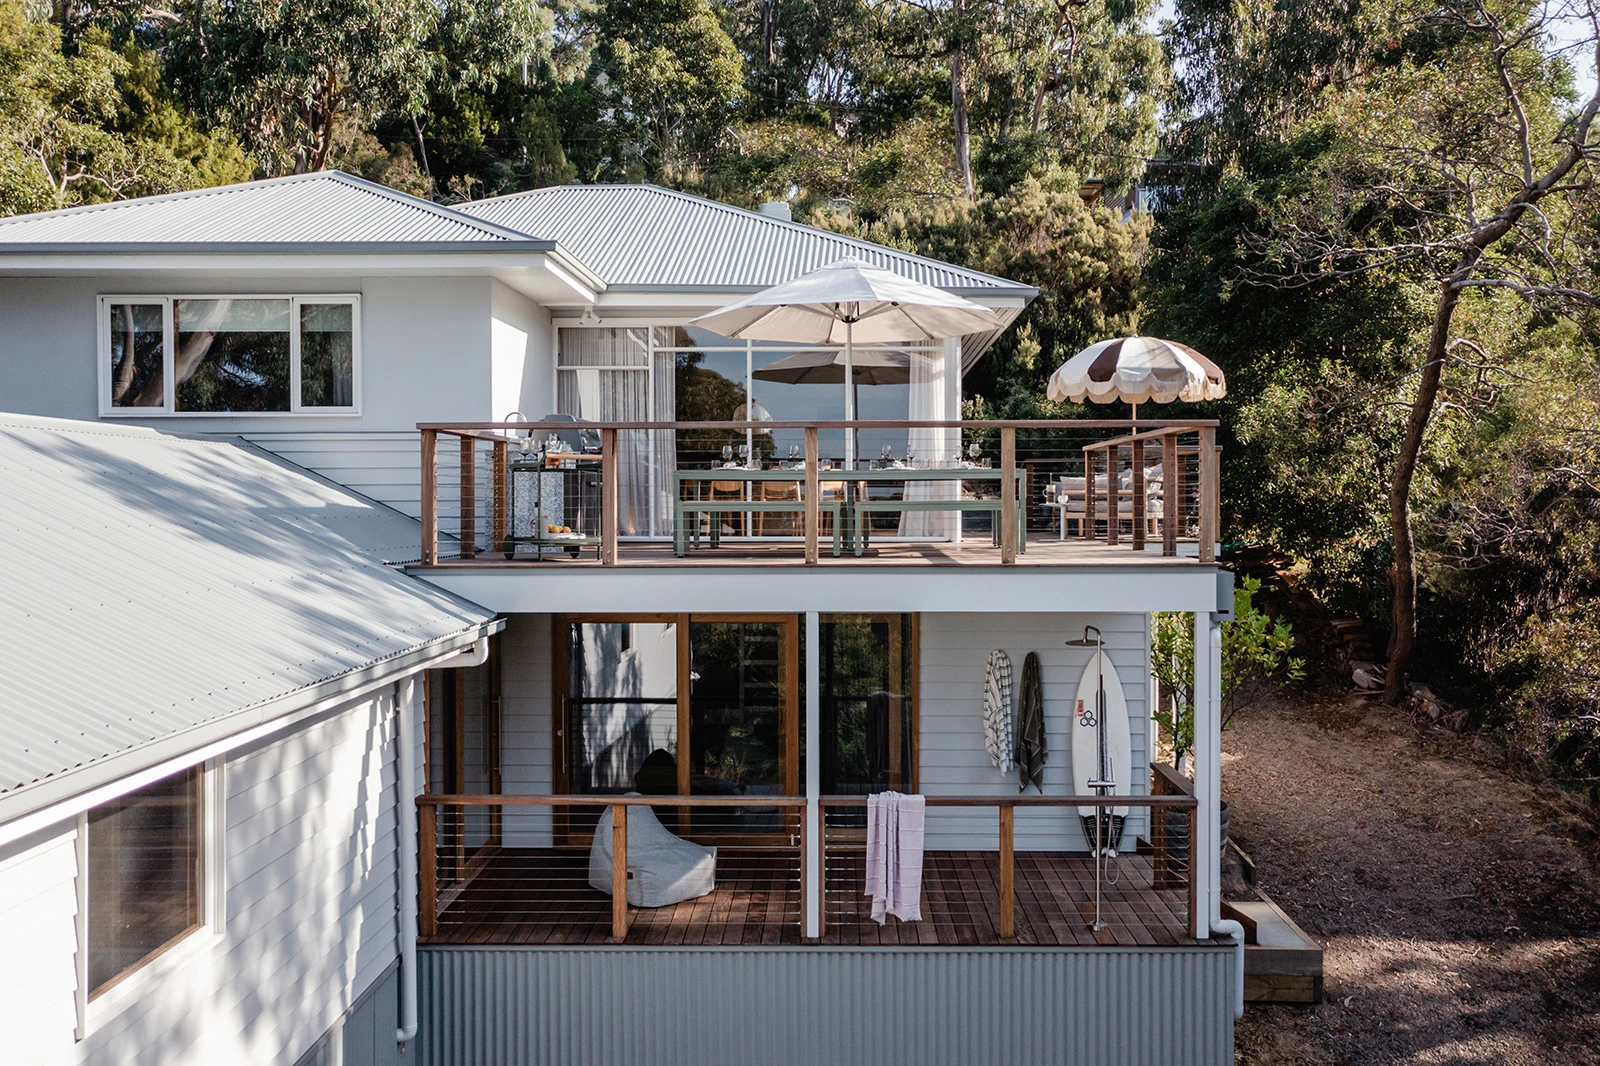 Image of double storey beach house with sun umbrella on deck